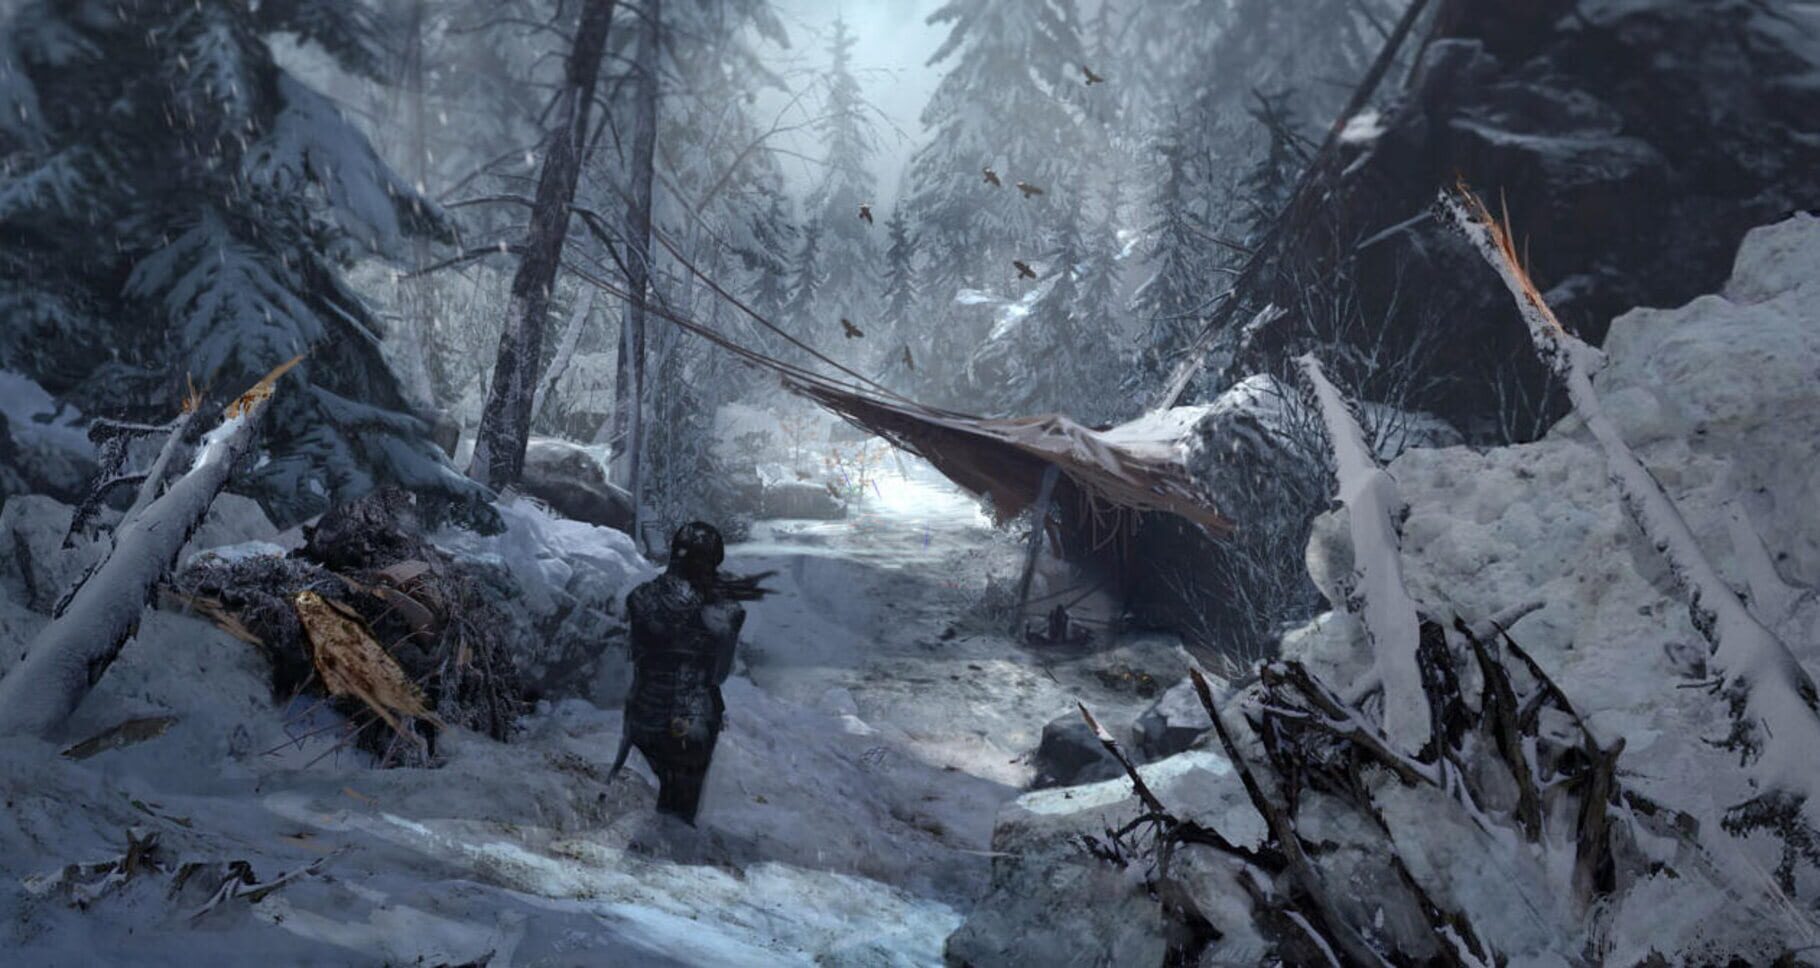 Rise of the Tomb Raider Image